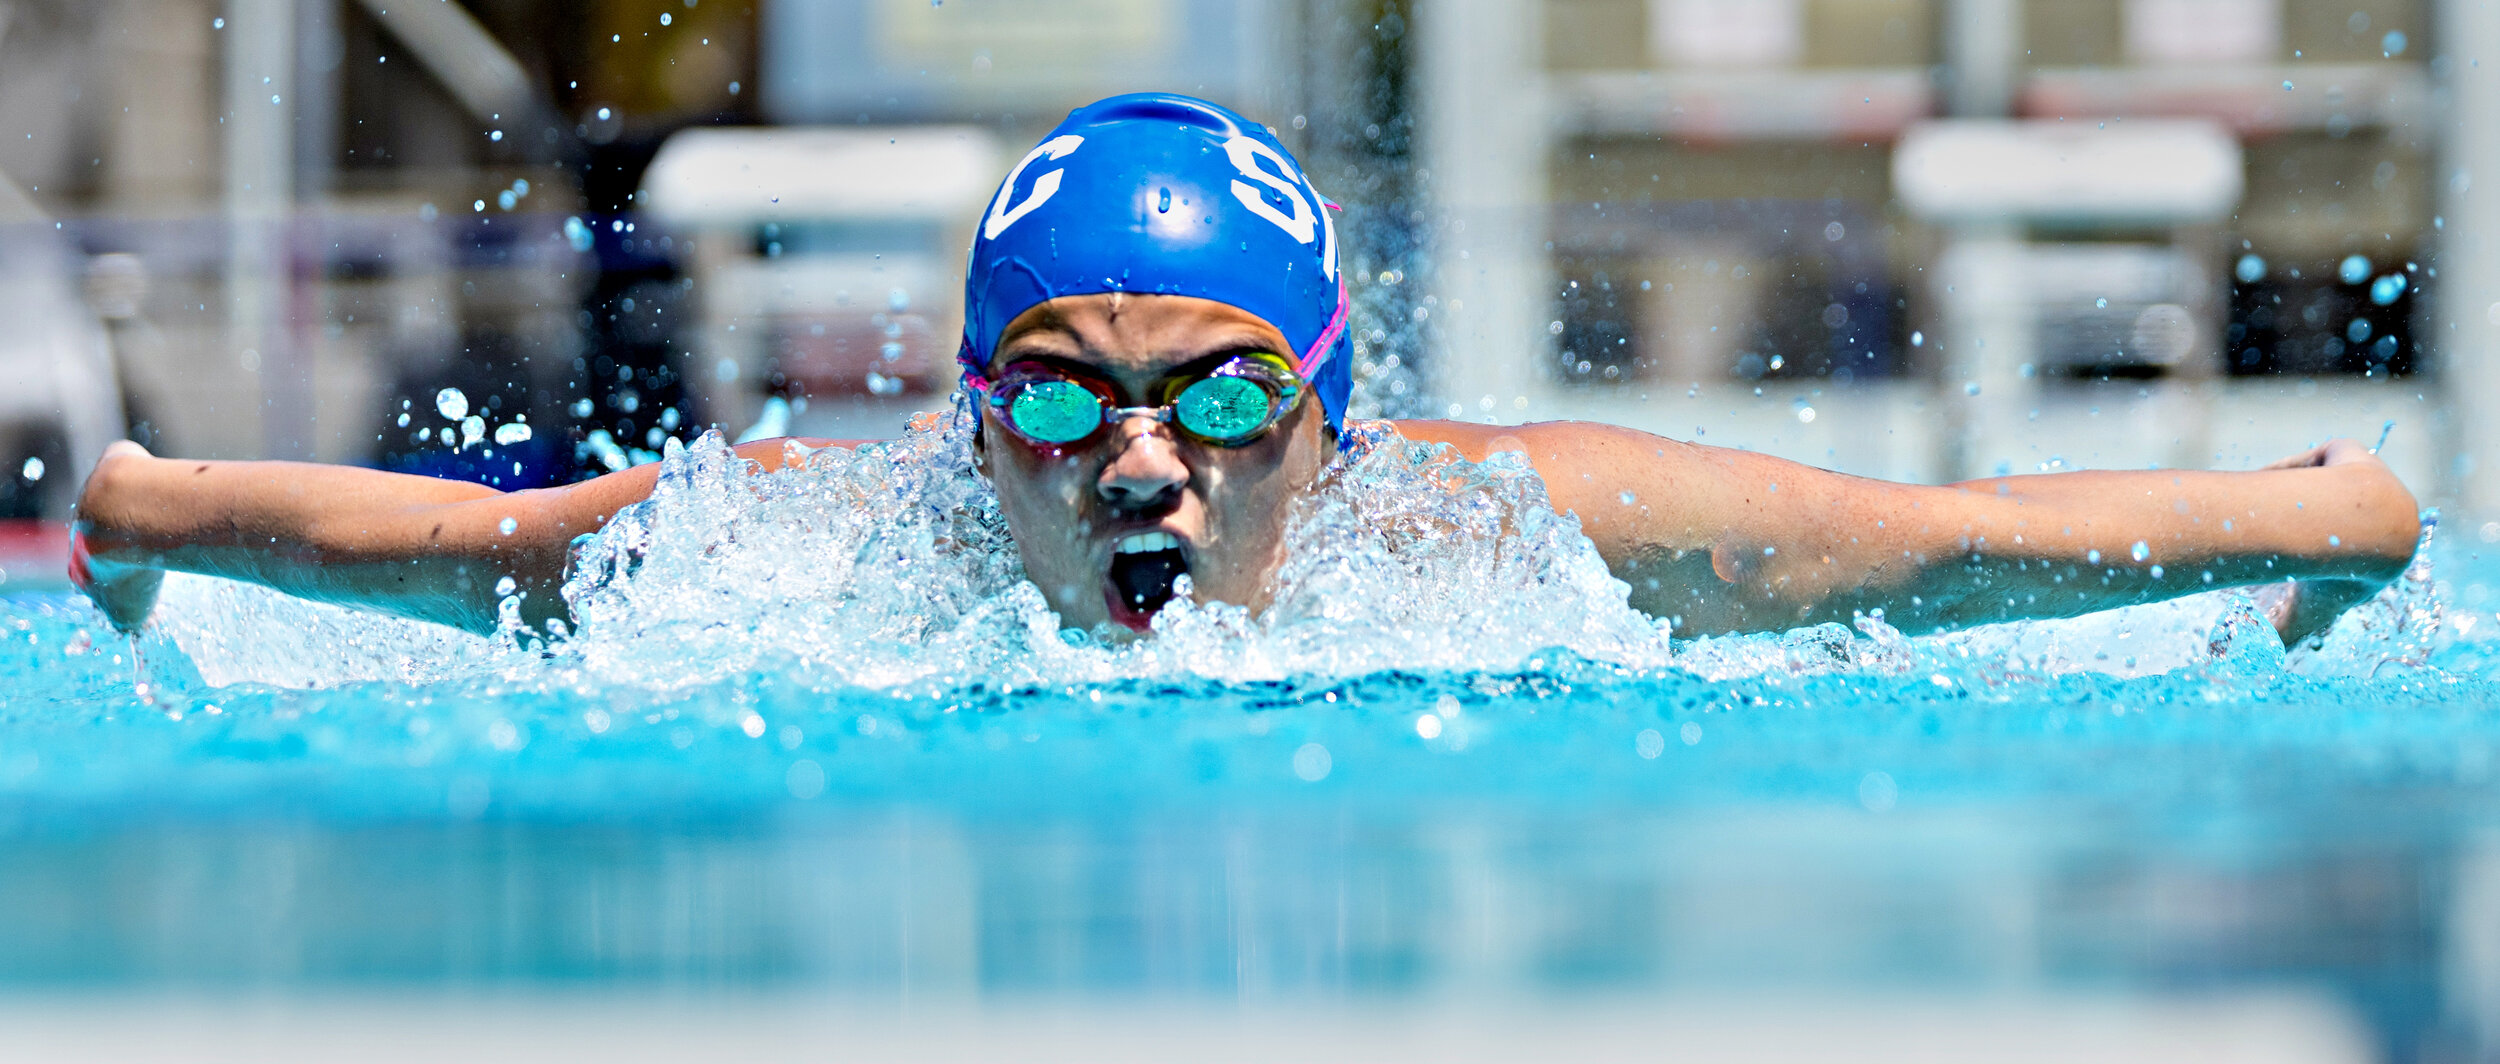  Giuliana Catro competes in the 100 yard butterfly at the Santa Monica Swim Center in Santa Monica, California on Friday, April 17, 2021.  It was the SMC's first swim meet since the 2020 season was cancelled due to the COVID-19 pandemic. 